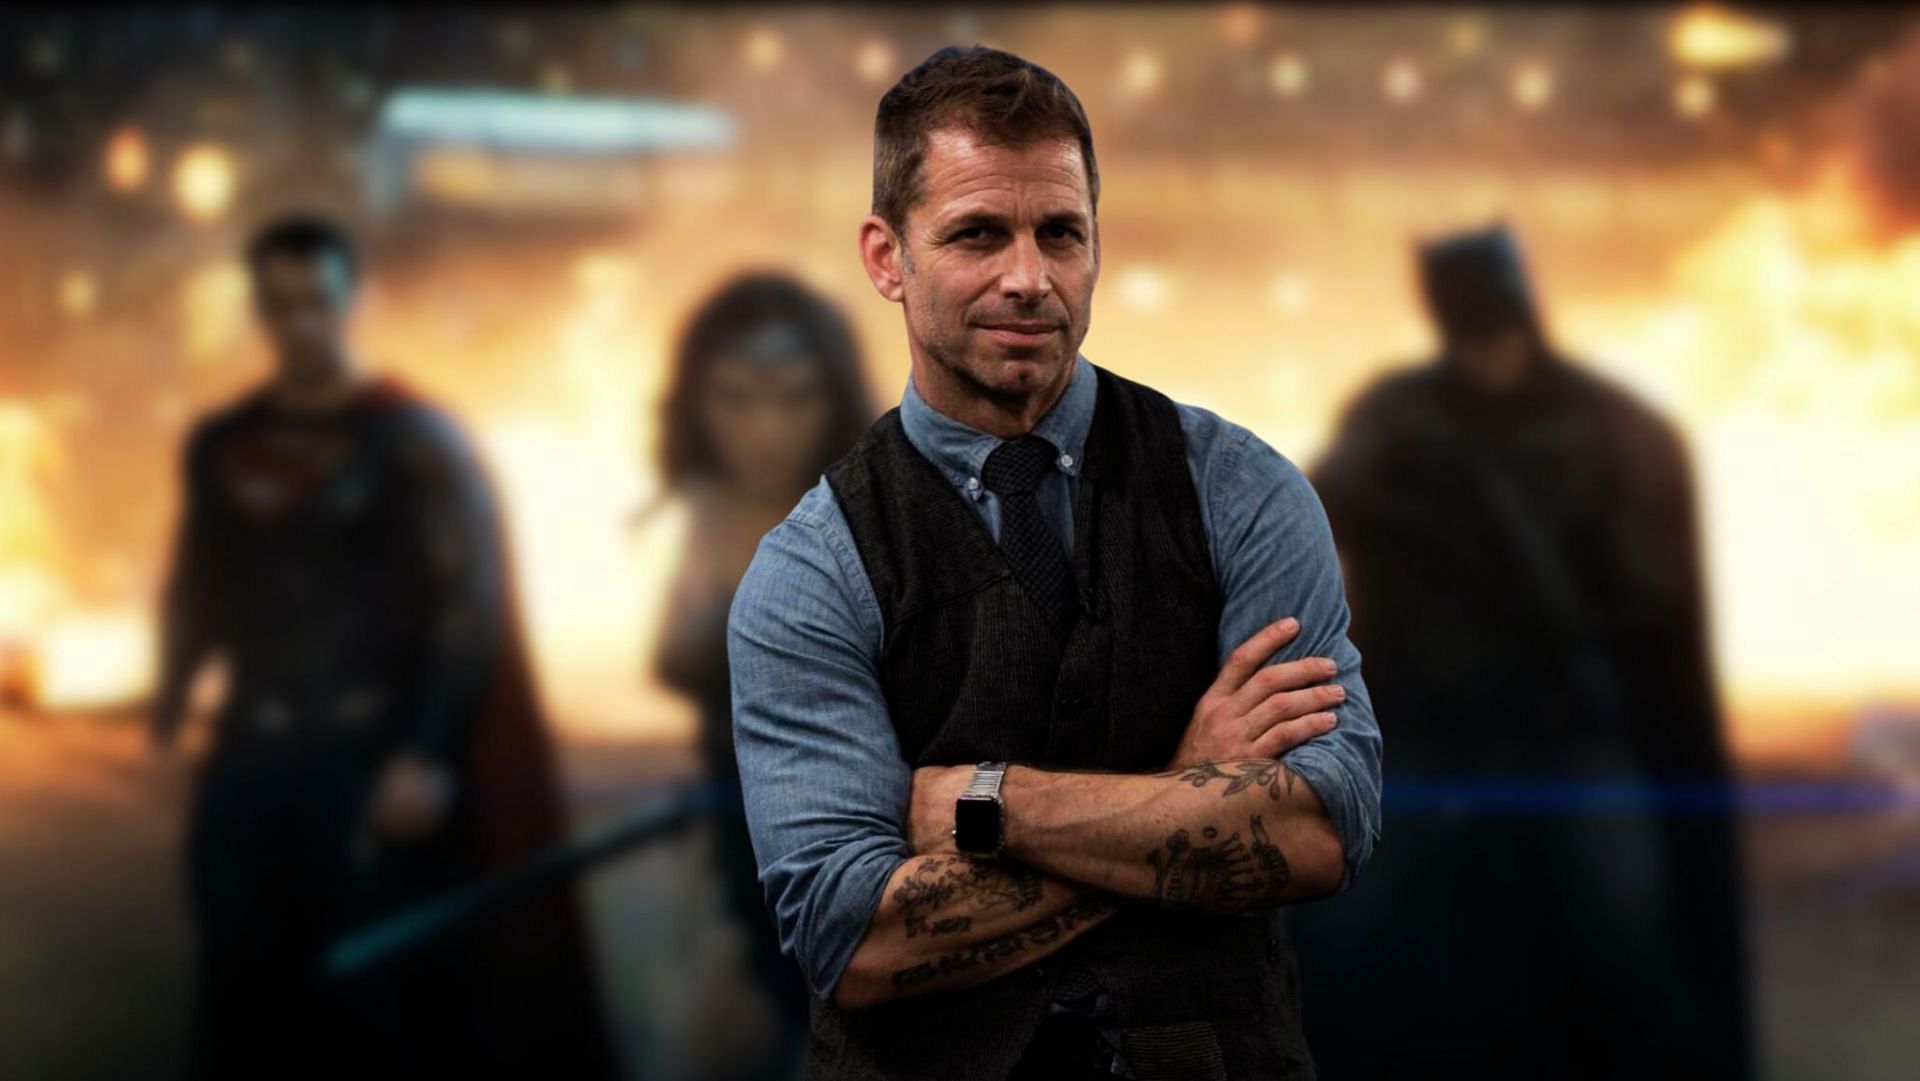 Director Zack Snyder discusses the divisive response to Batman v Superman: Dawn of Justice in an exclusive Q&amp;A session (Image via Sportskeeda)